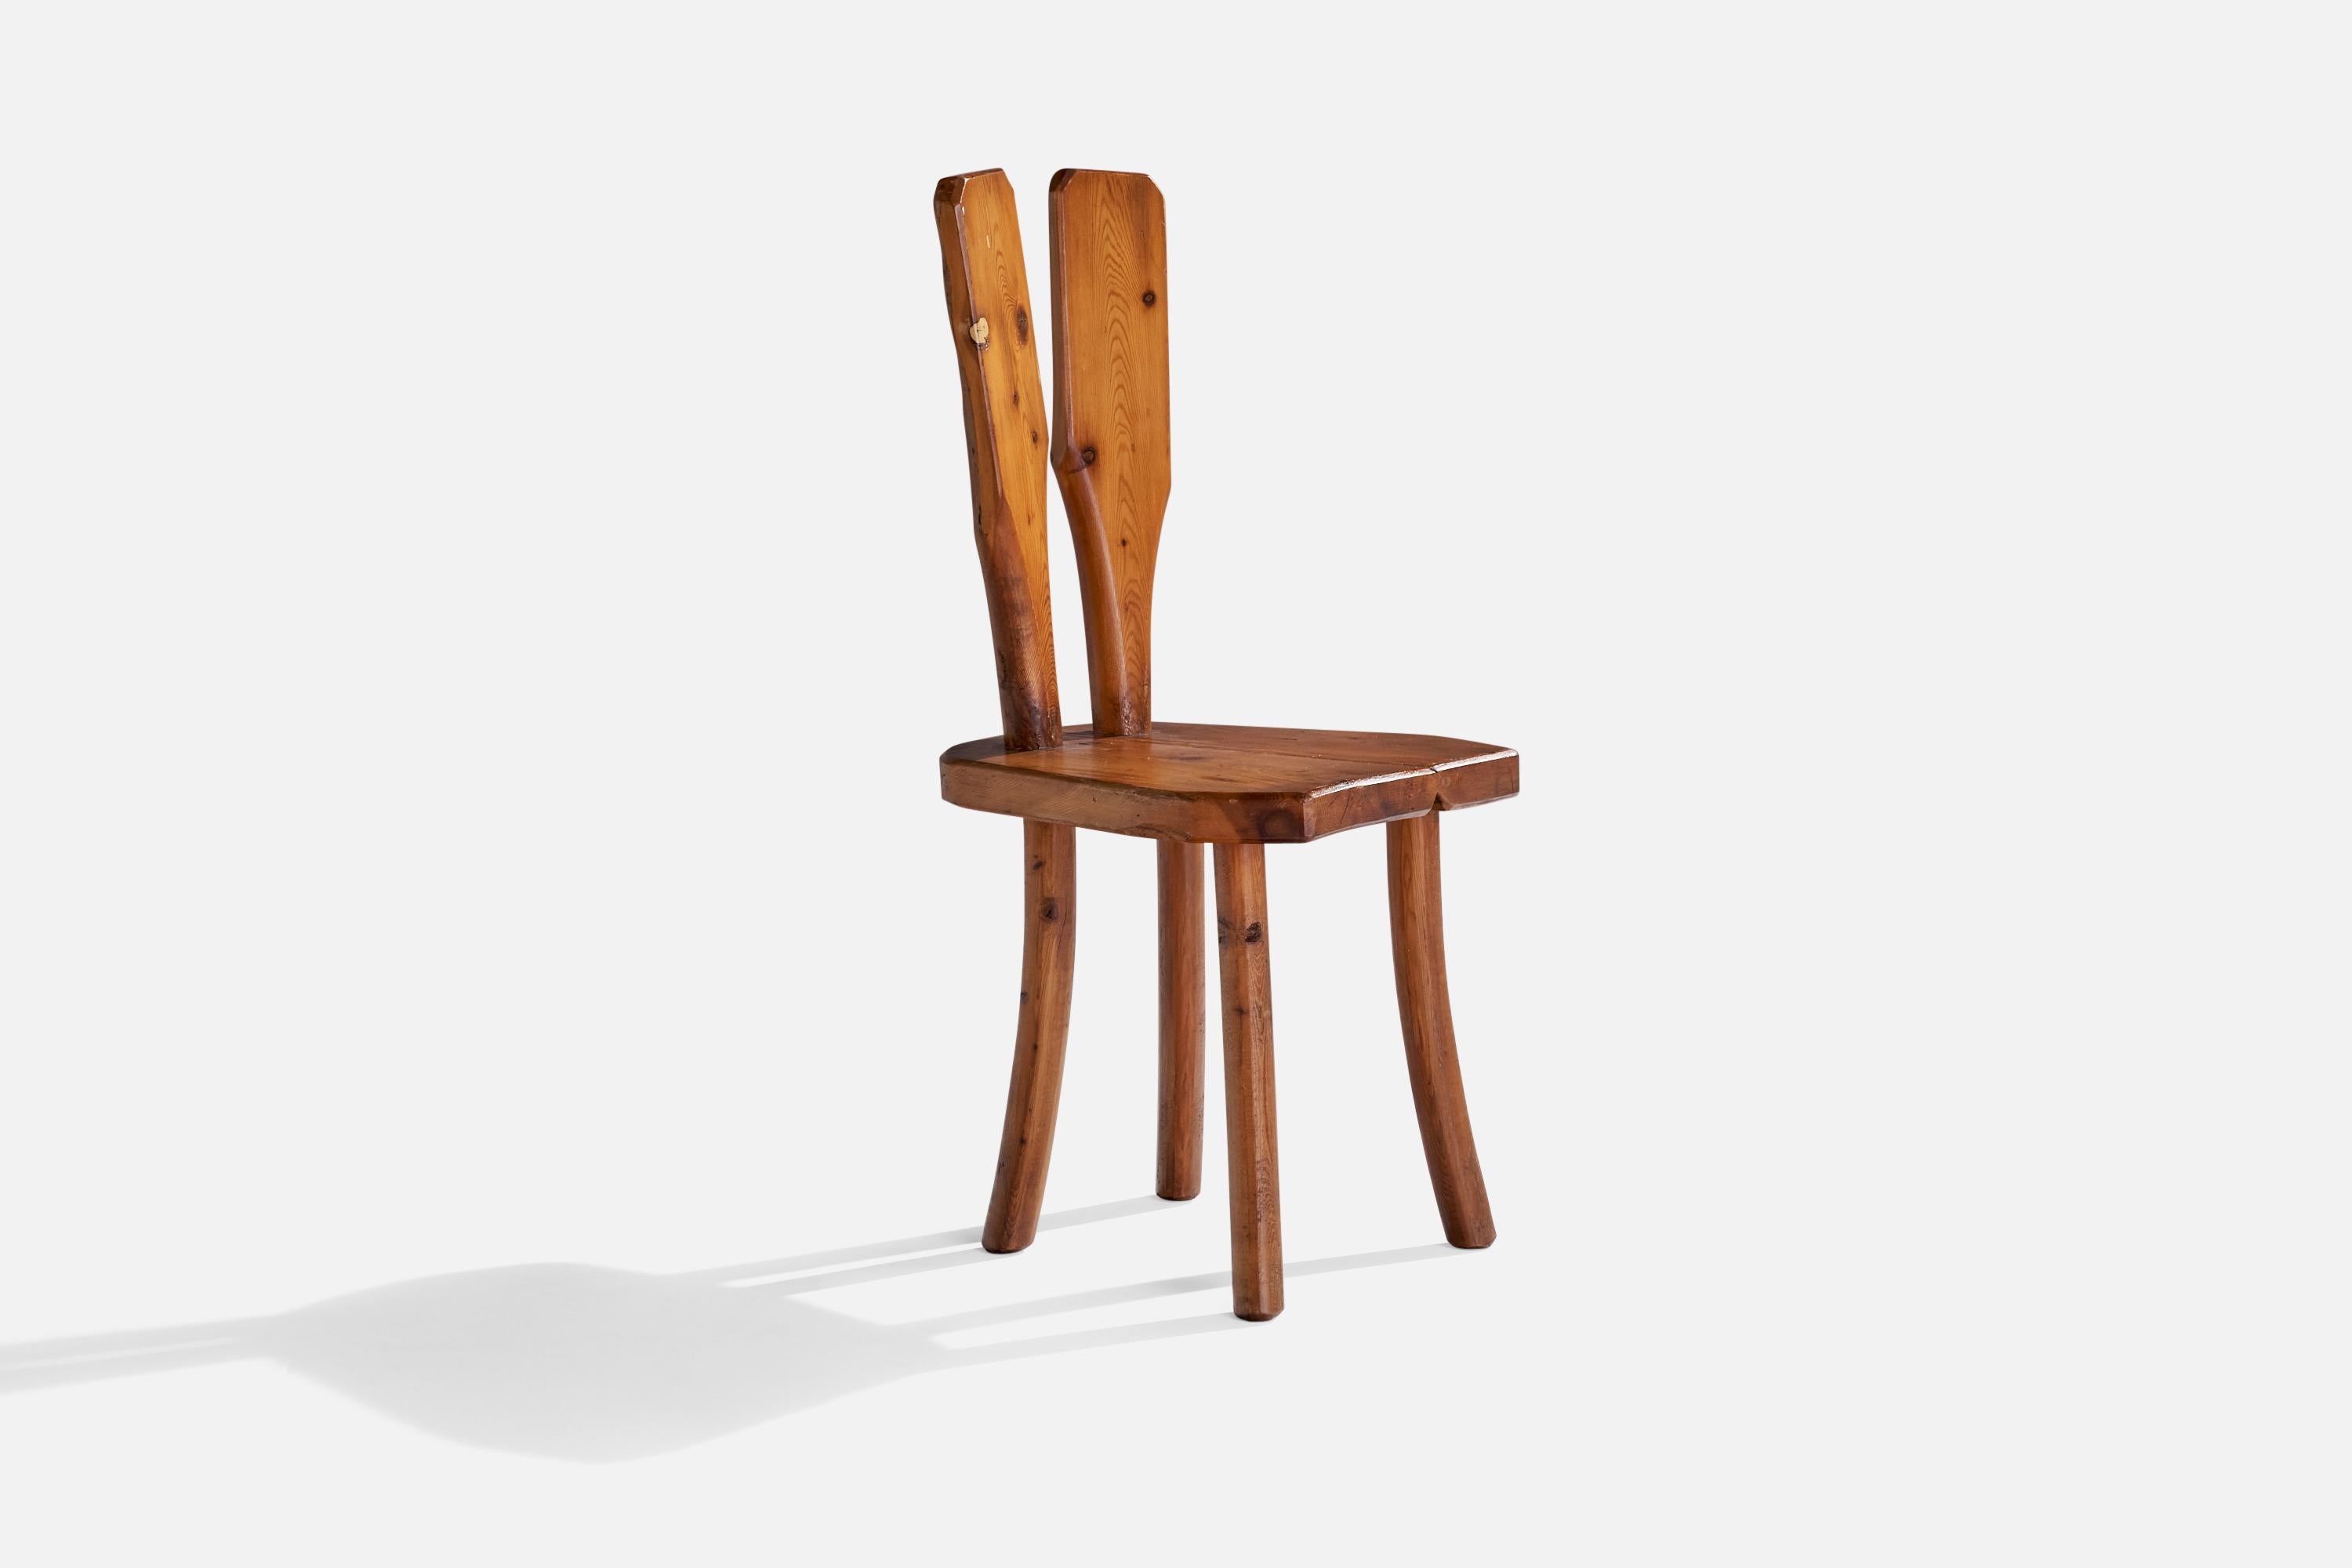 A pine side chair designed and produced in Italy, 1950s.

Seat height 17.75”.